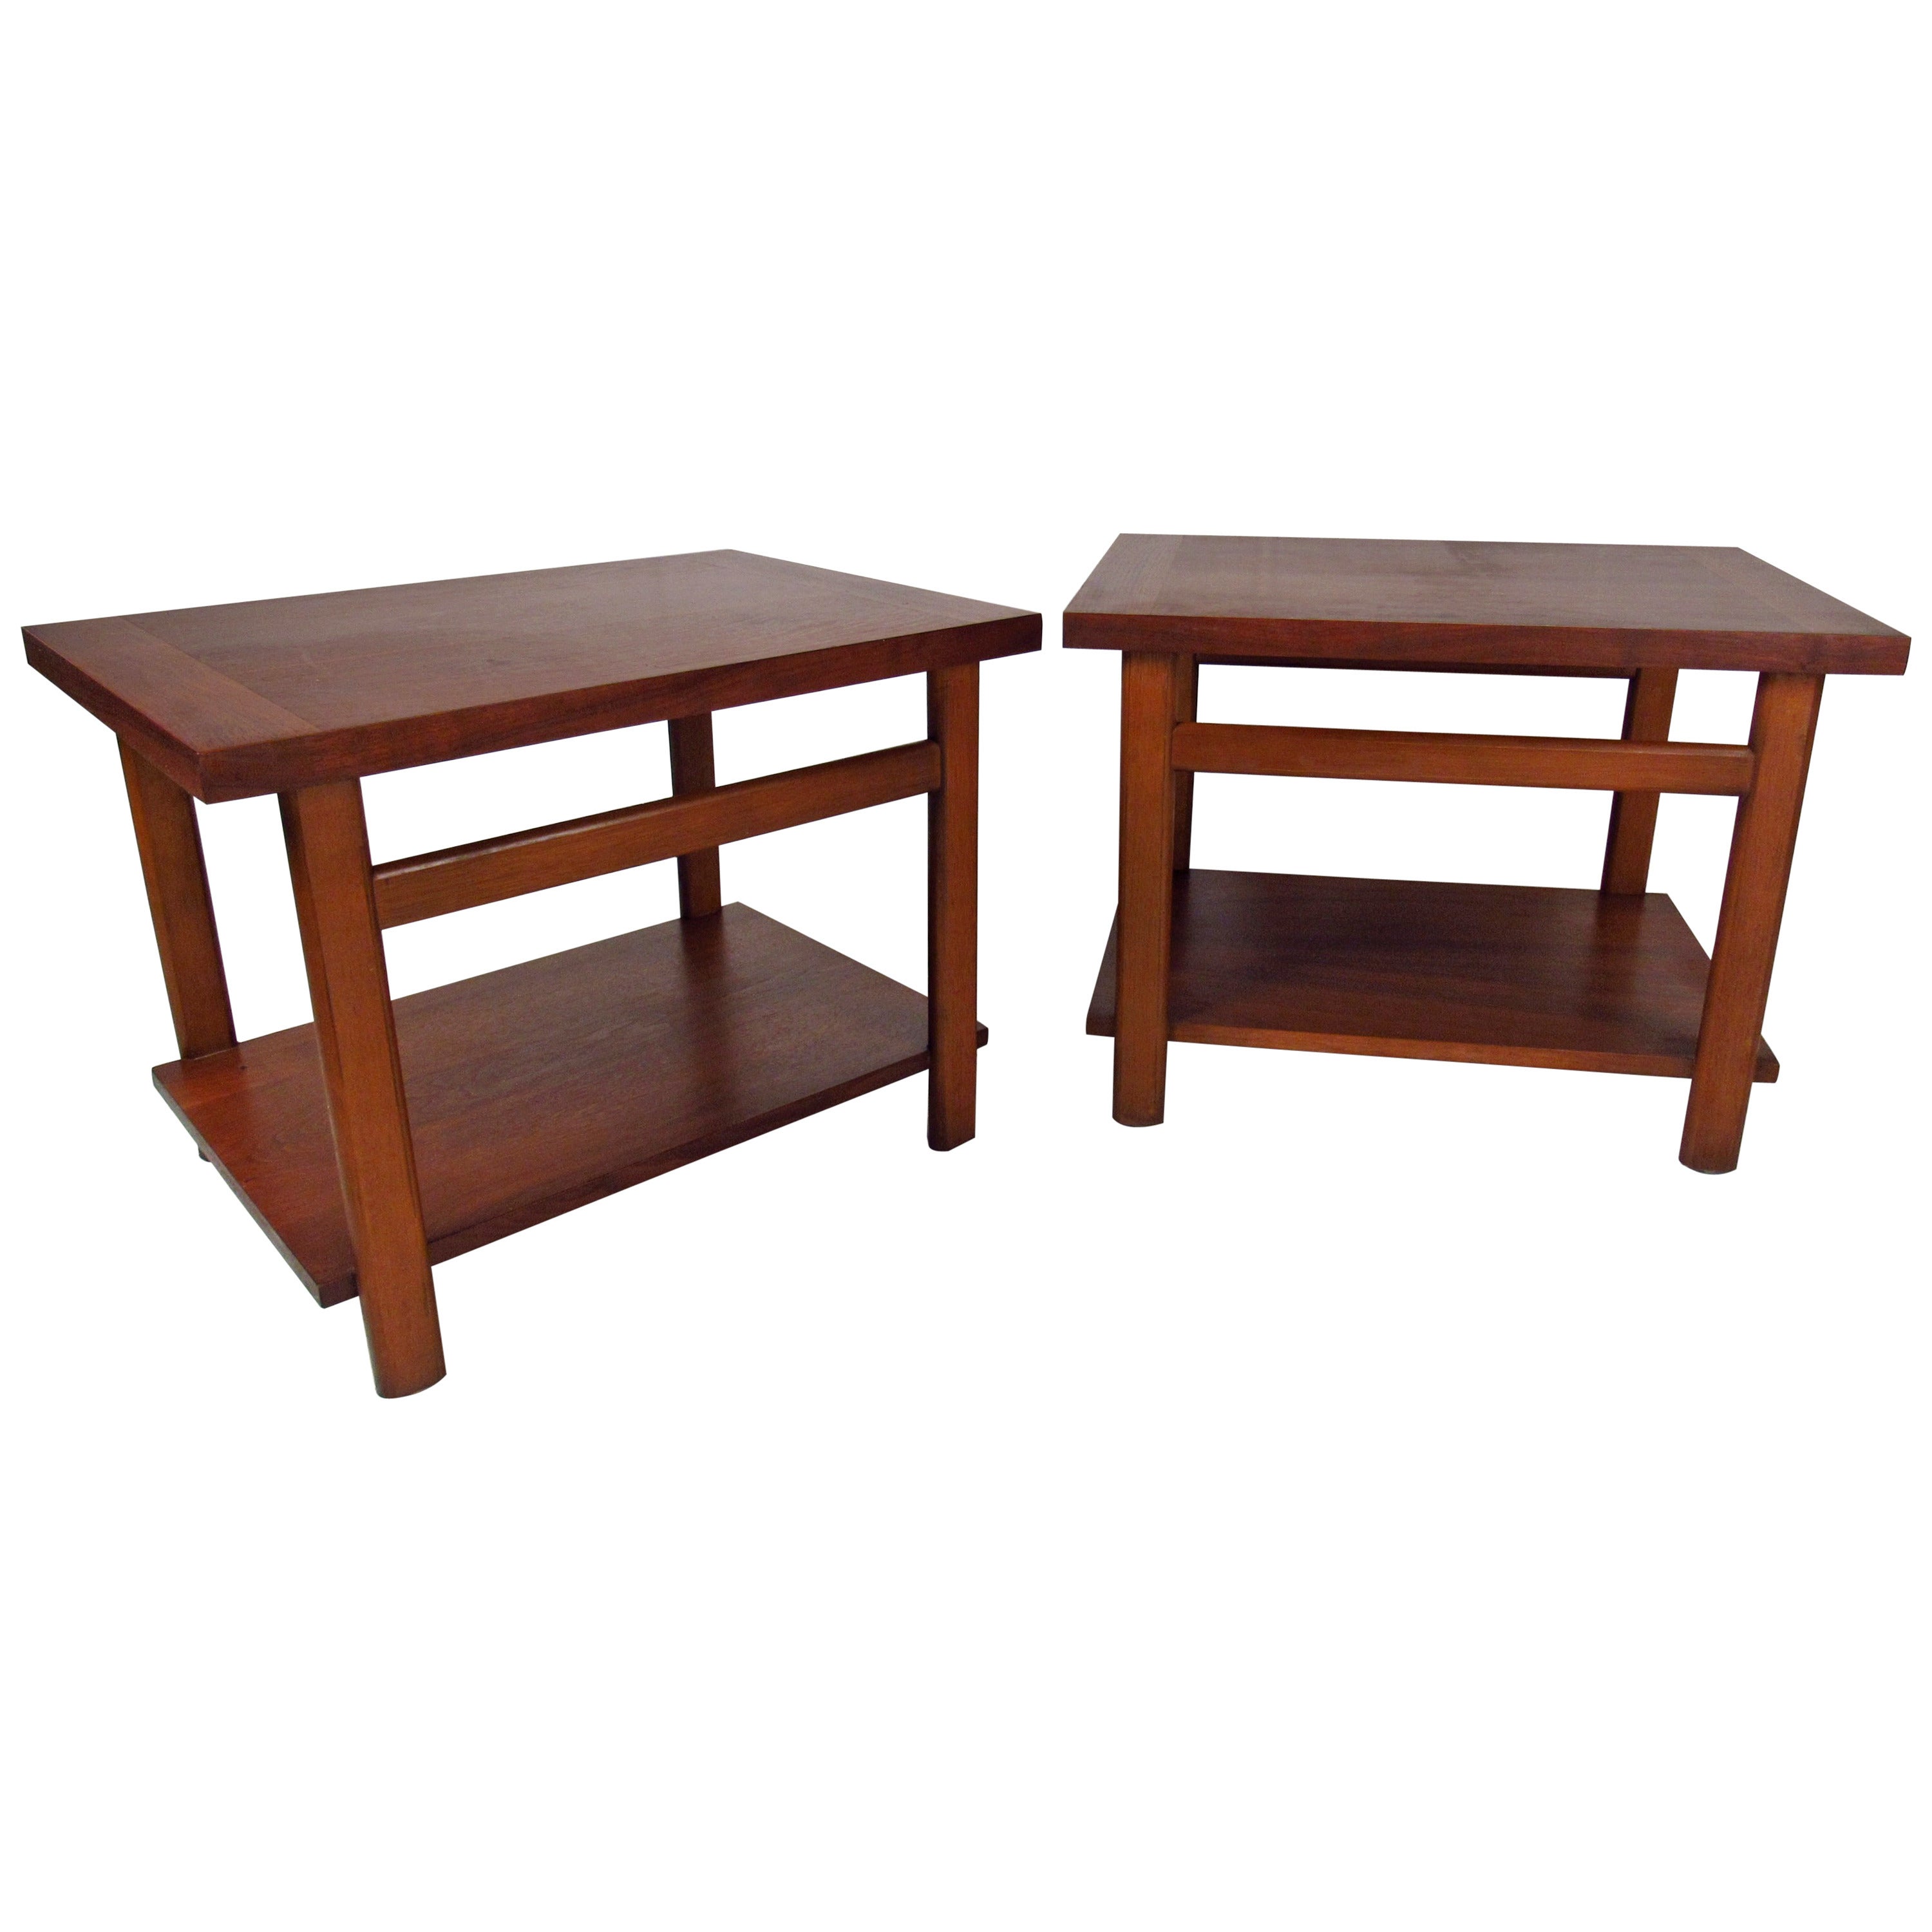 Pair of Mid-Century Modern Walnut End Tables by Lane